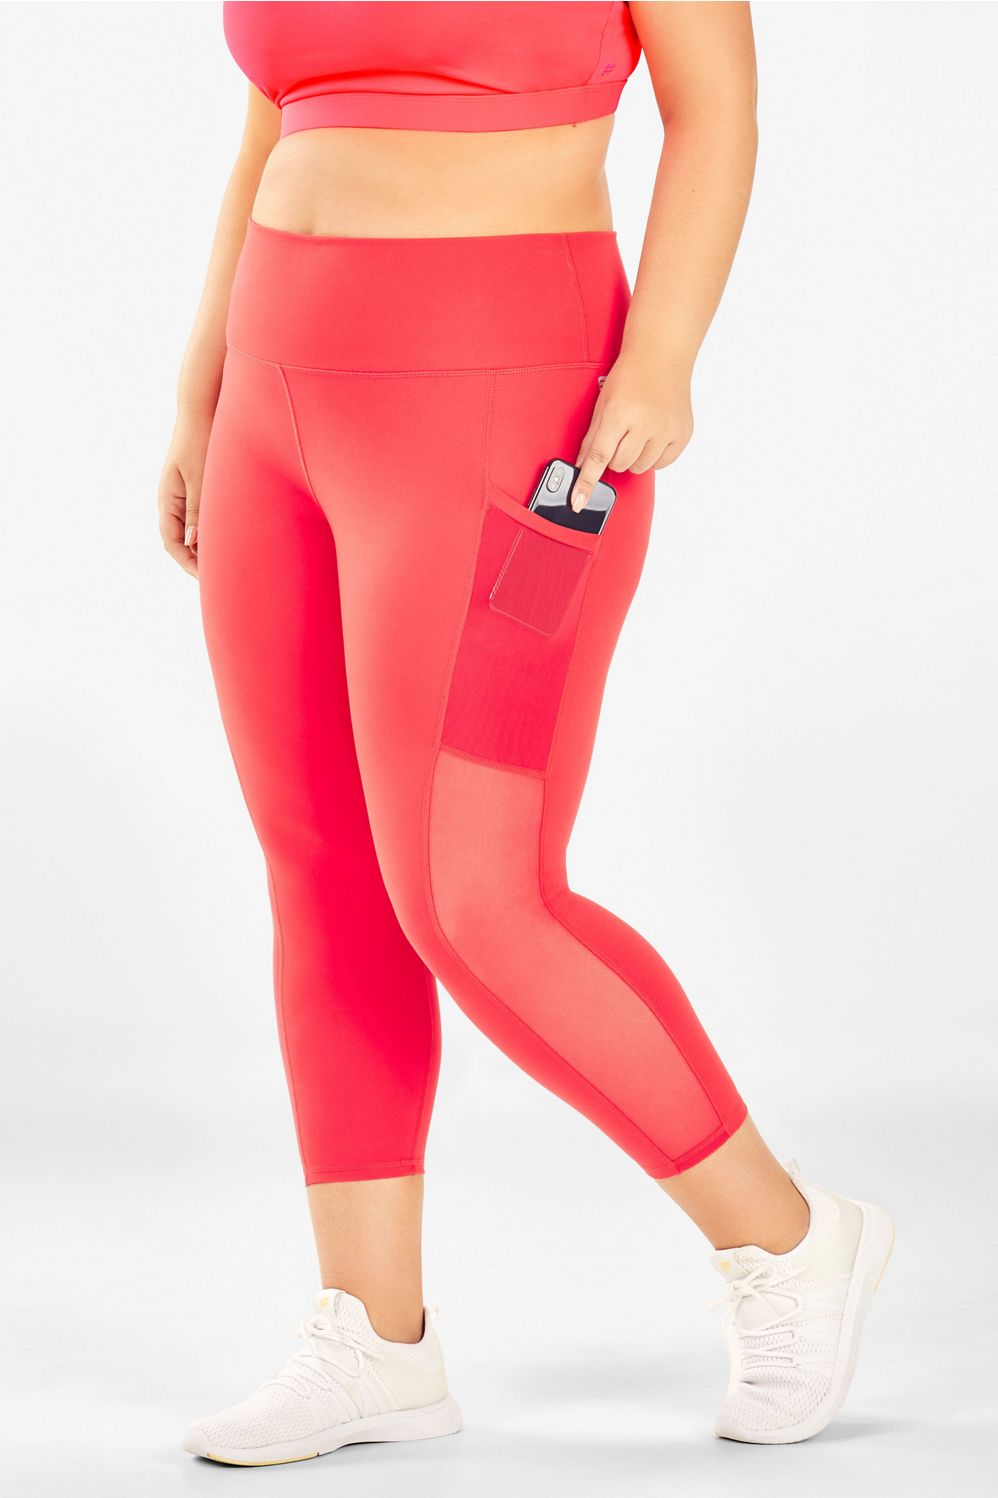 Mila High-Waisted Fabletics in Pop With Coral Legging Capri Pocket 